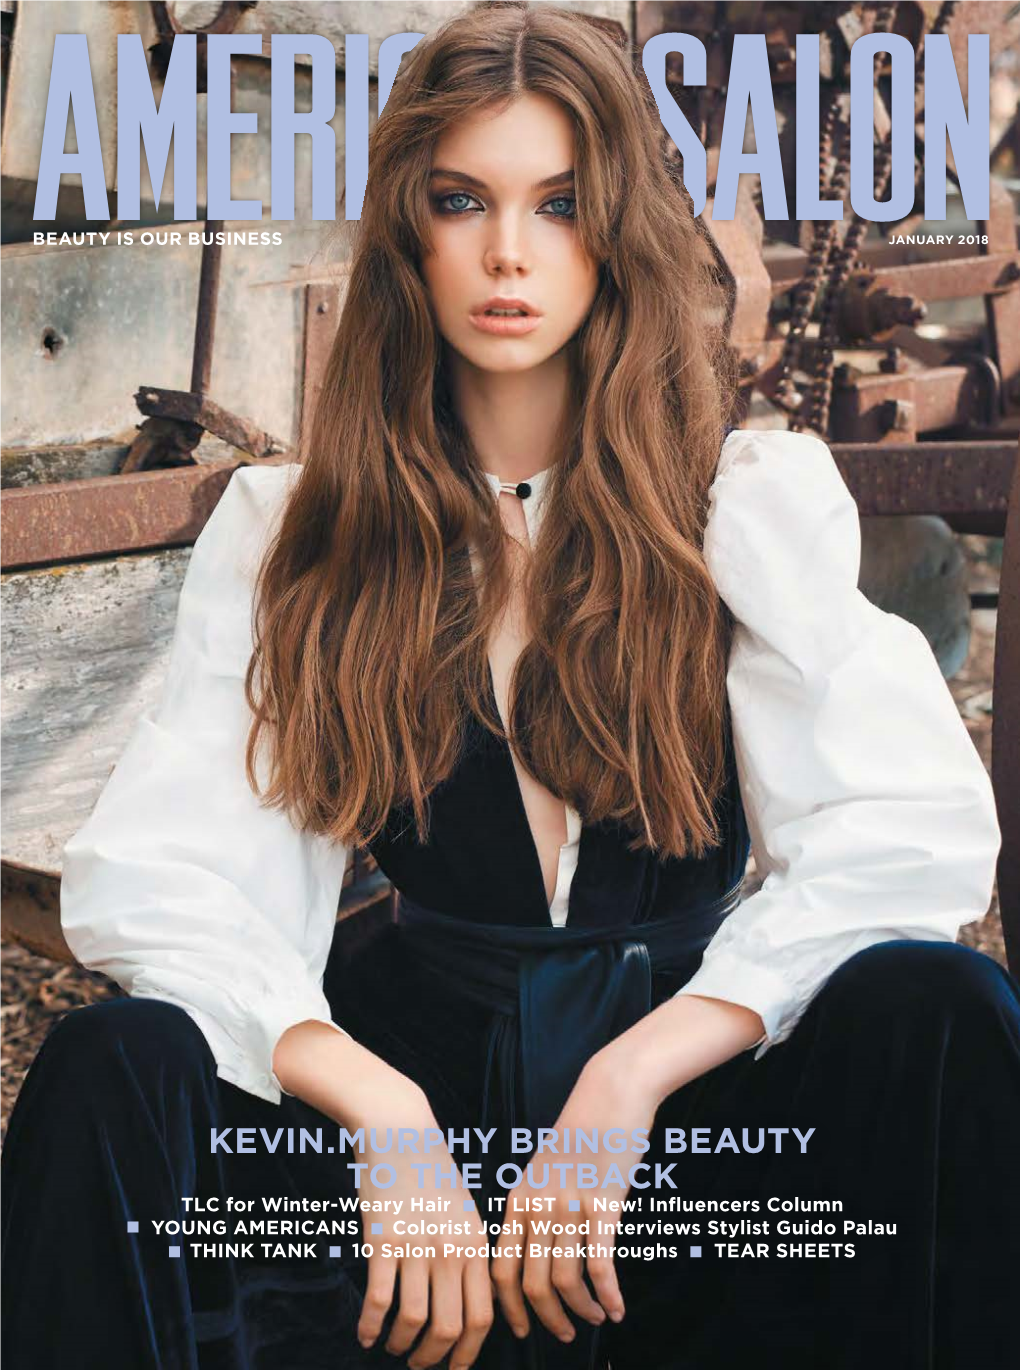 Kevin.Murphy Brings Beauty to the Outback